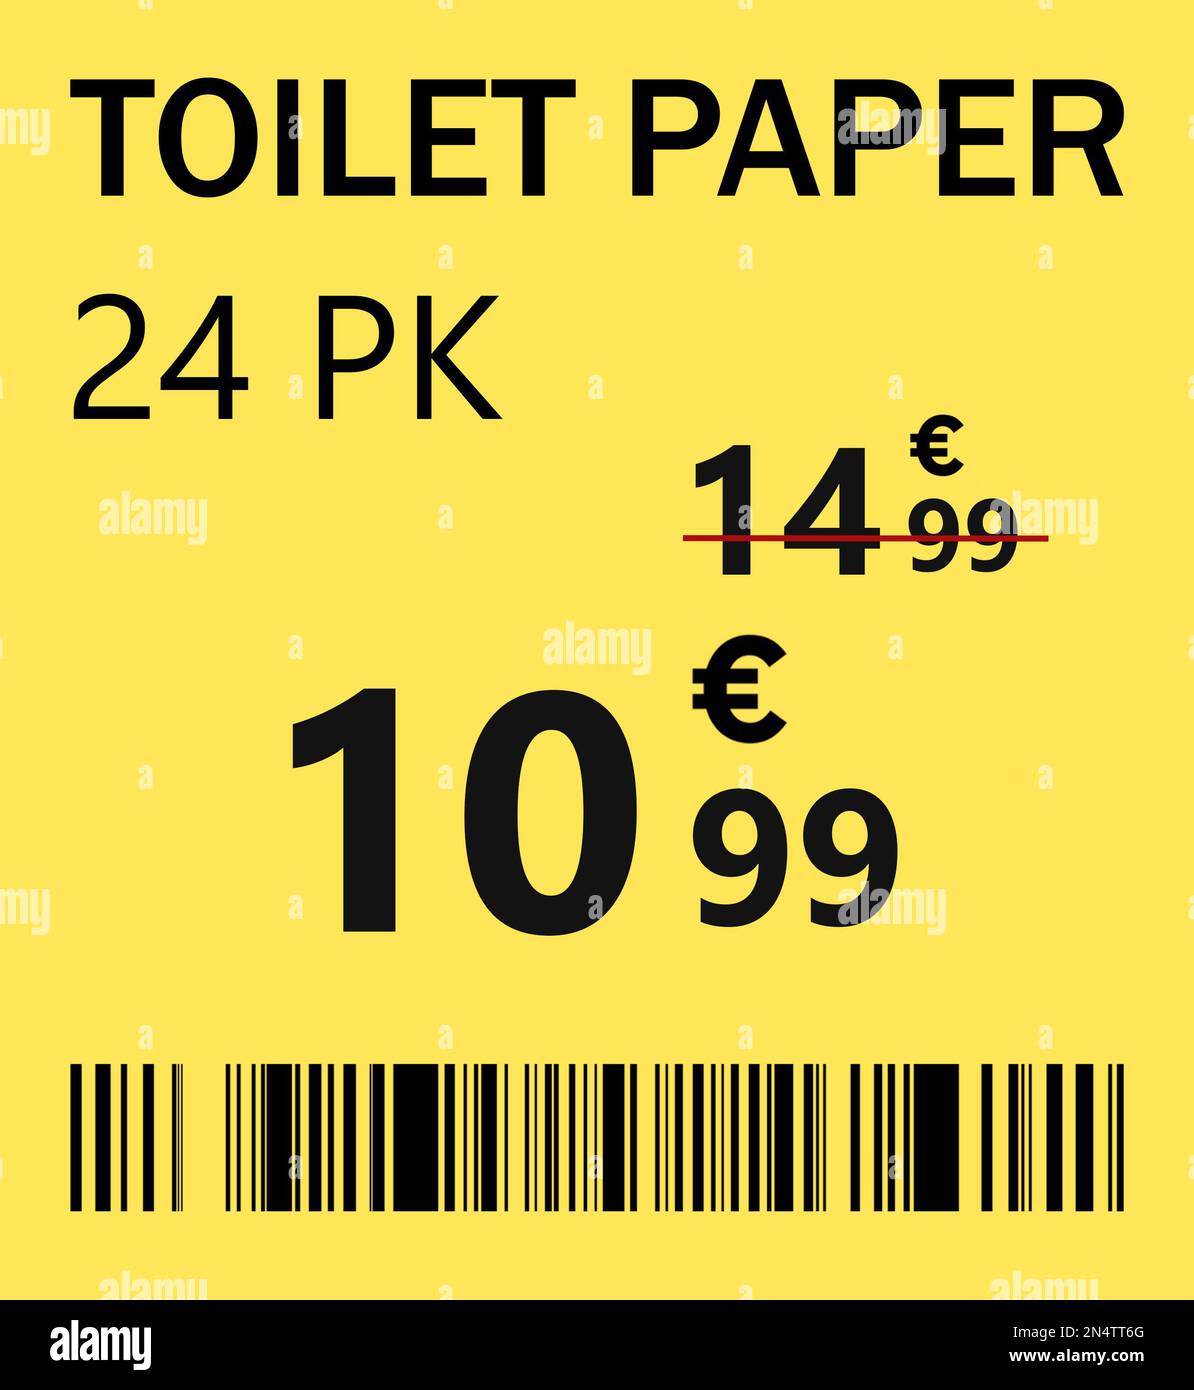 Price Tag / Label 10% Off with Euro Sign Stock Illustration